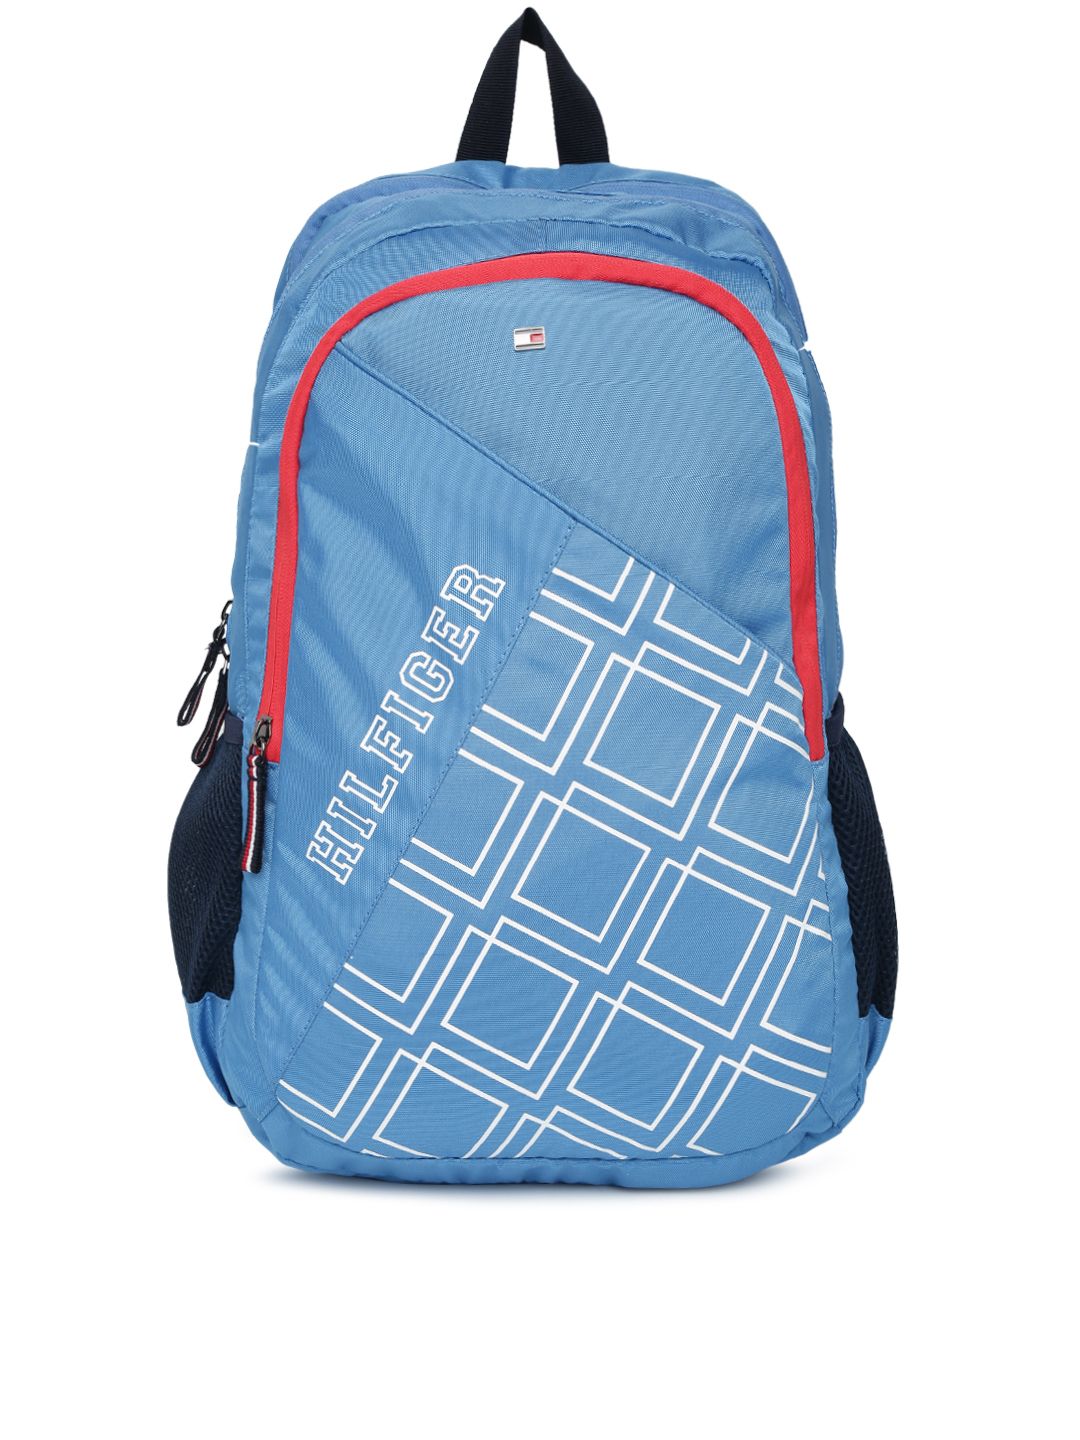 Tommy Hilfiger Unisex Blue & Off-White Geometric Backpack Price in India